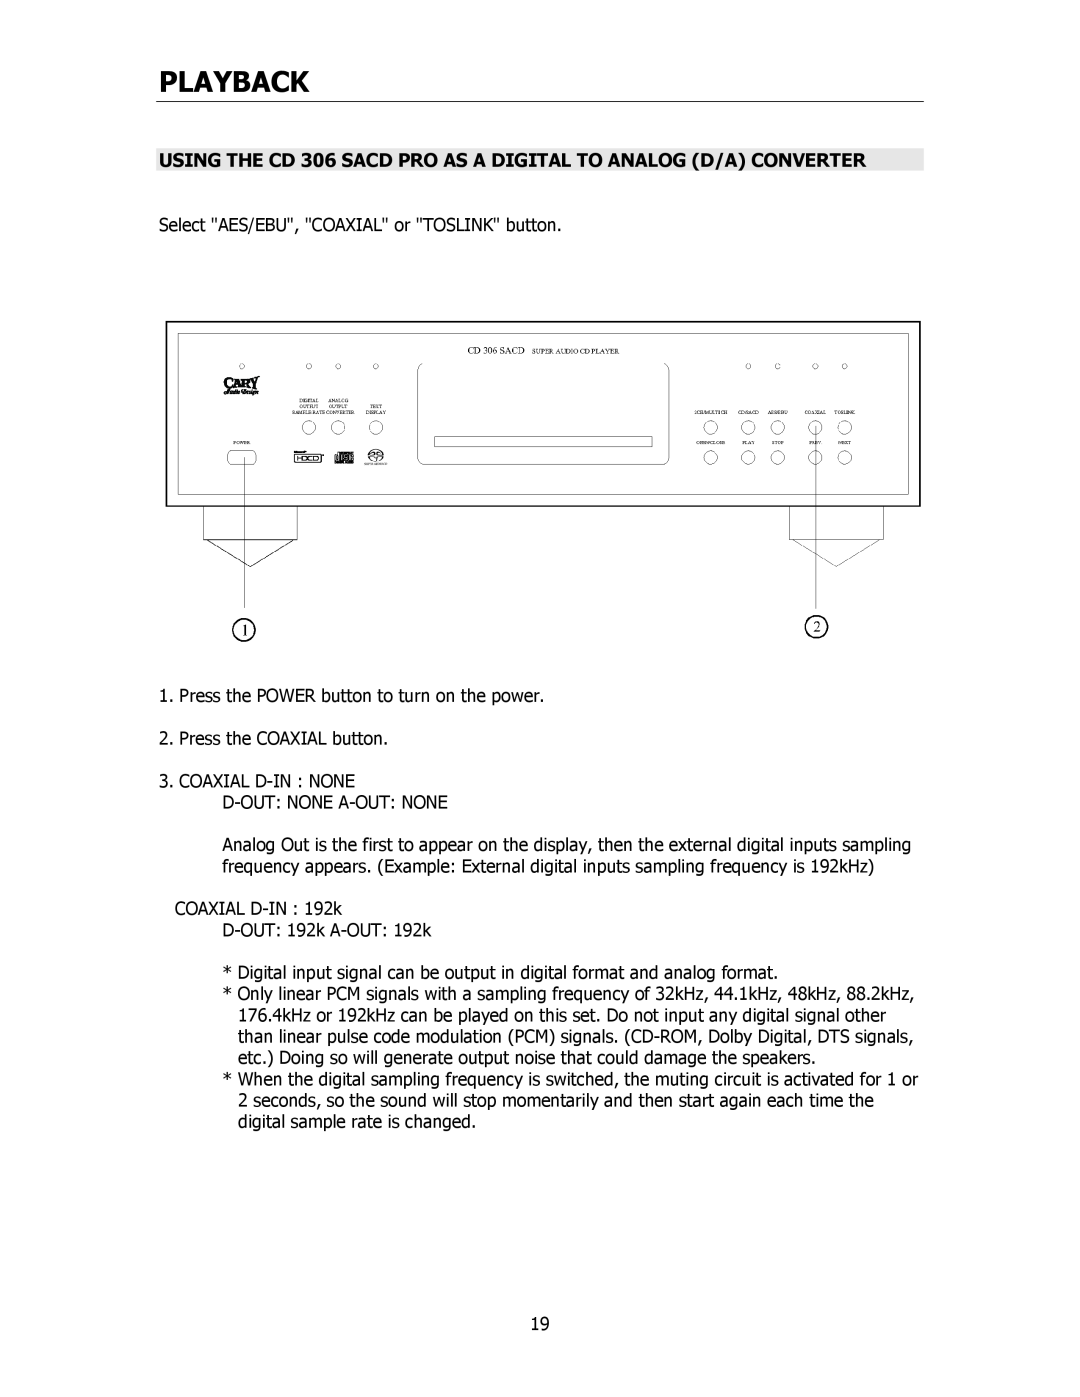 Cary Audio Design CD306SACD owner manual Playback, Select AES/EBU, COAXIAL or TOSLINK button 